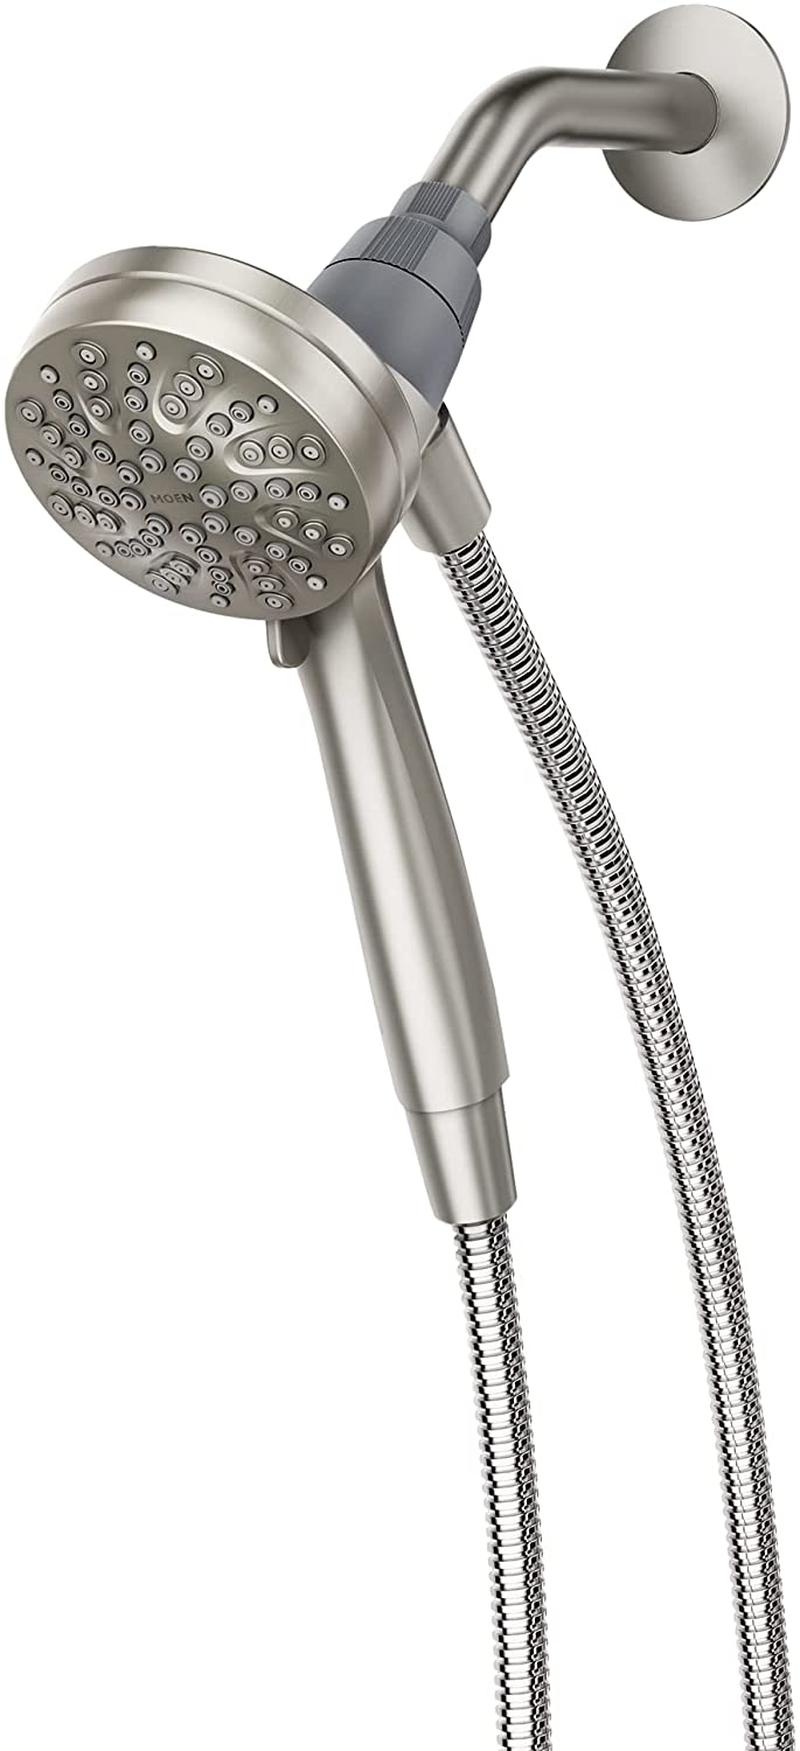 Moen 26100EP Engage Magnetix 3.5-Inch Six-Function Handheld Showerhead with Eco-Performance Magnetic Docking System, Chrome